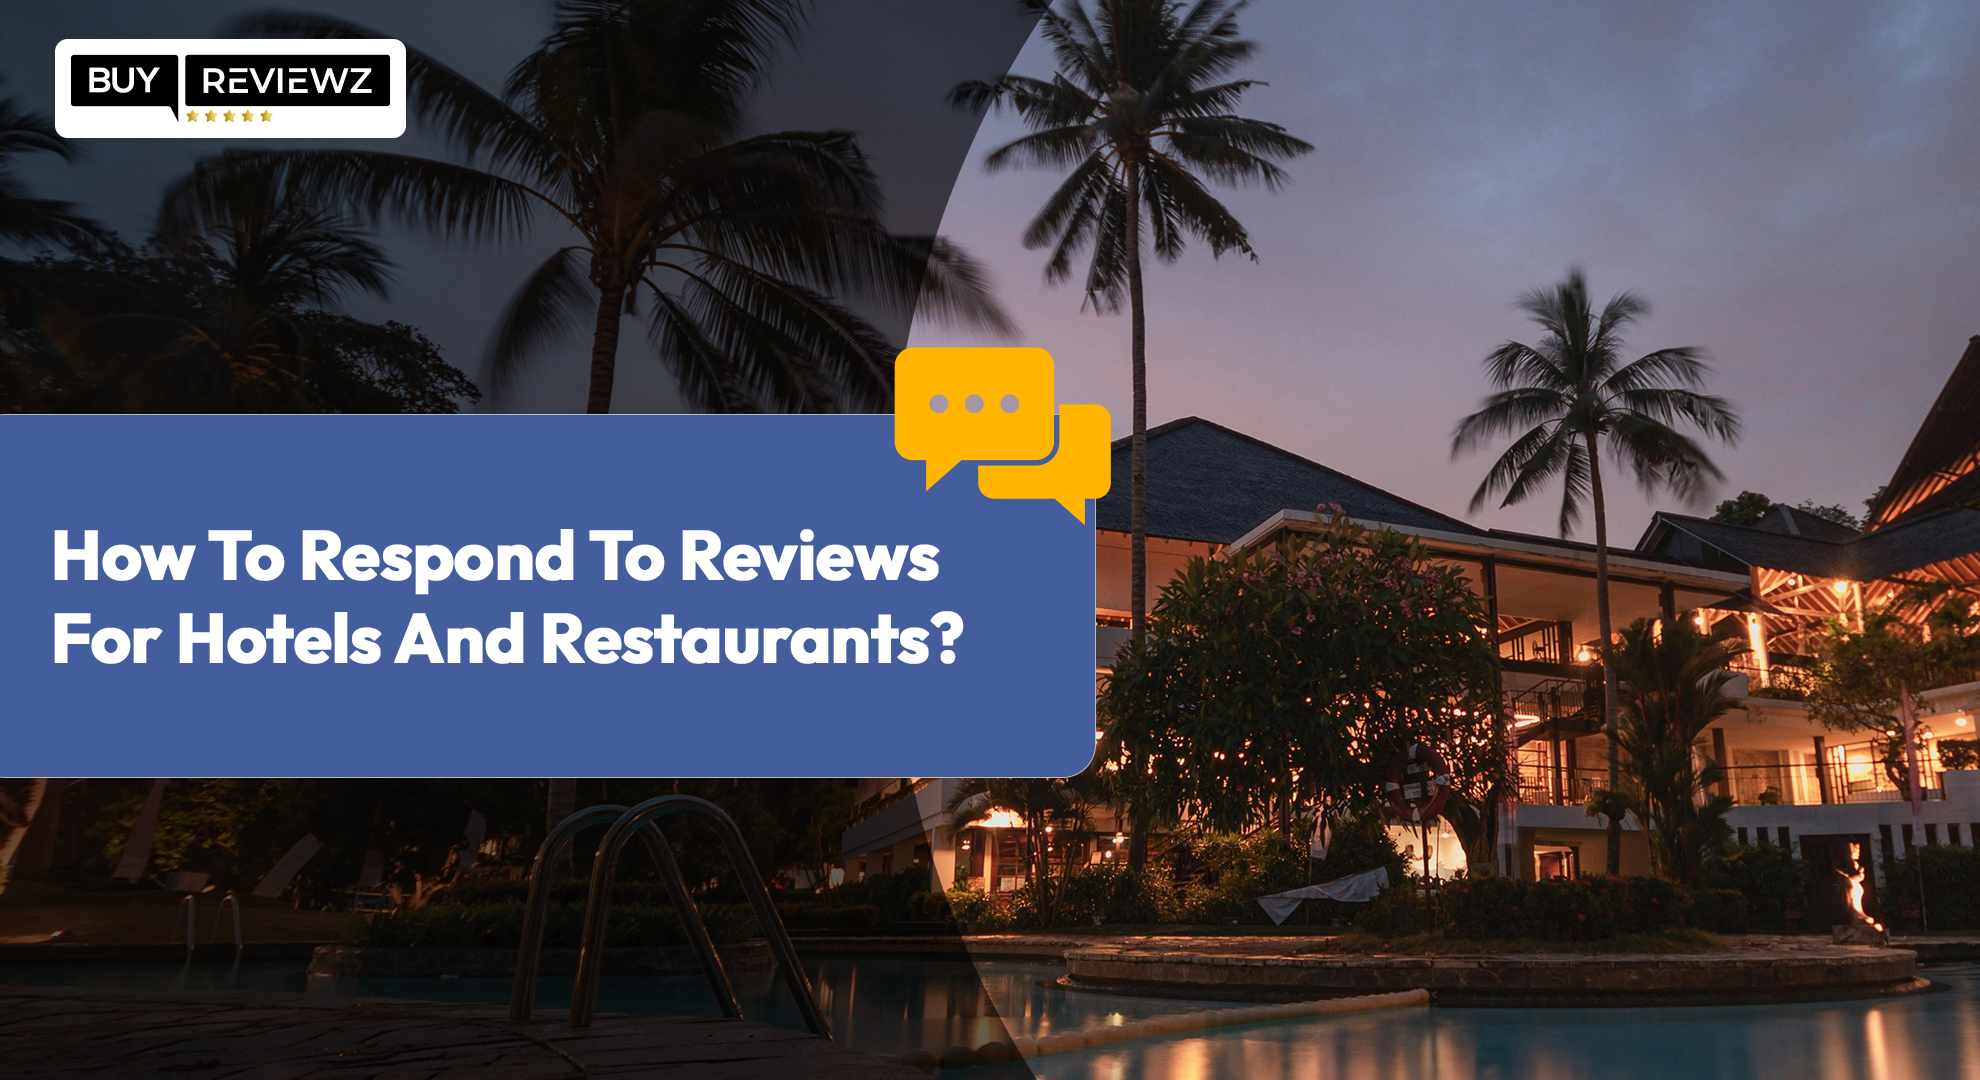 How To Respond To Reviews For Hotels And Restaurants